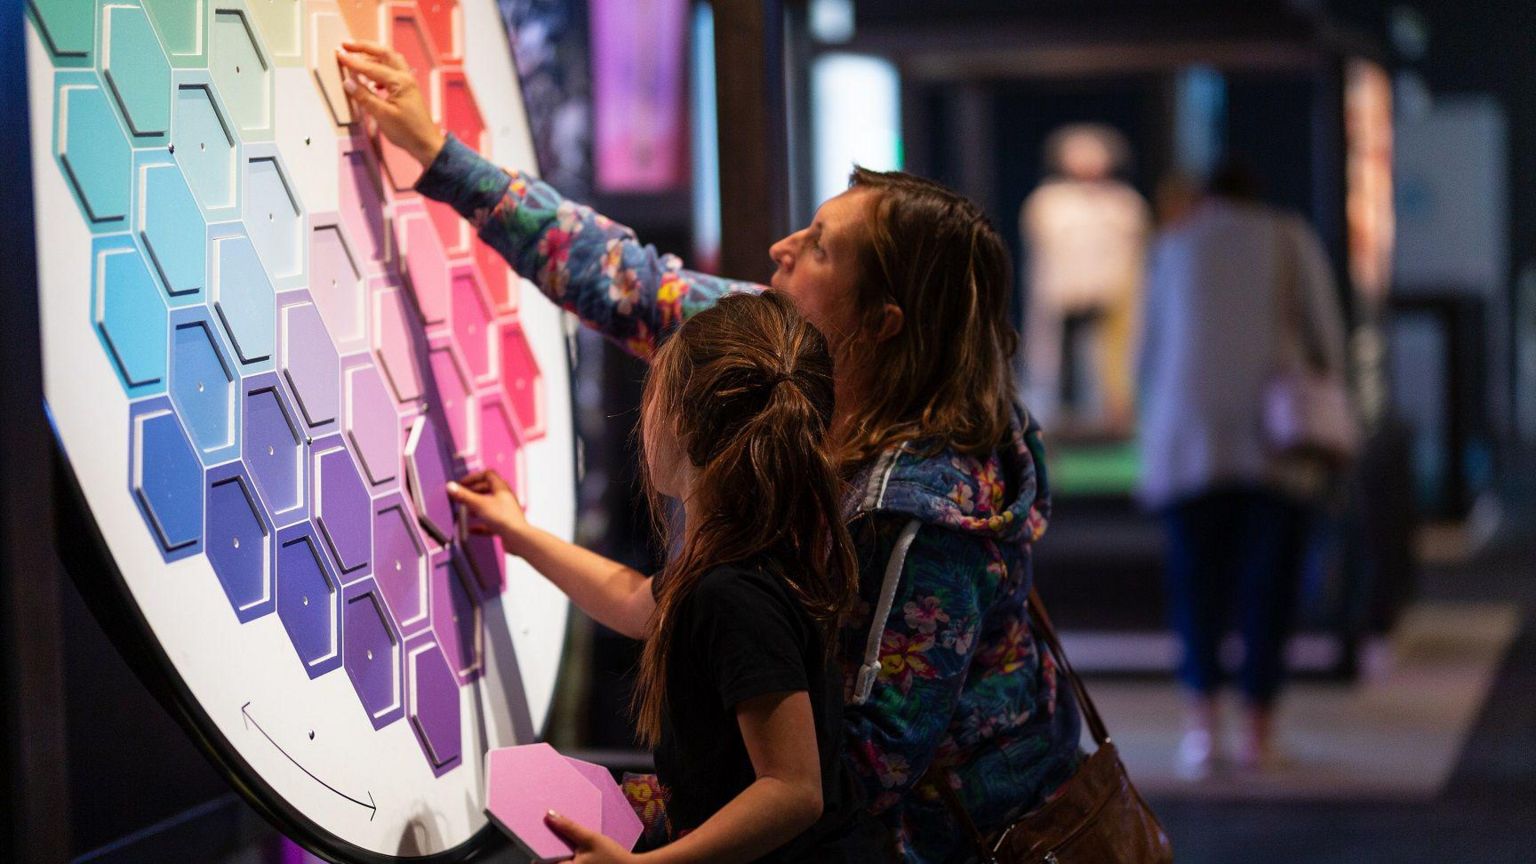 A woman and a girl placing hexagonal puzzle pieces on a board